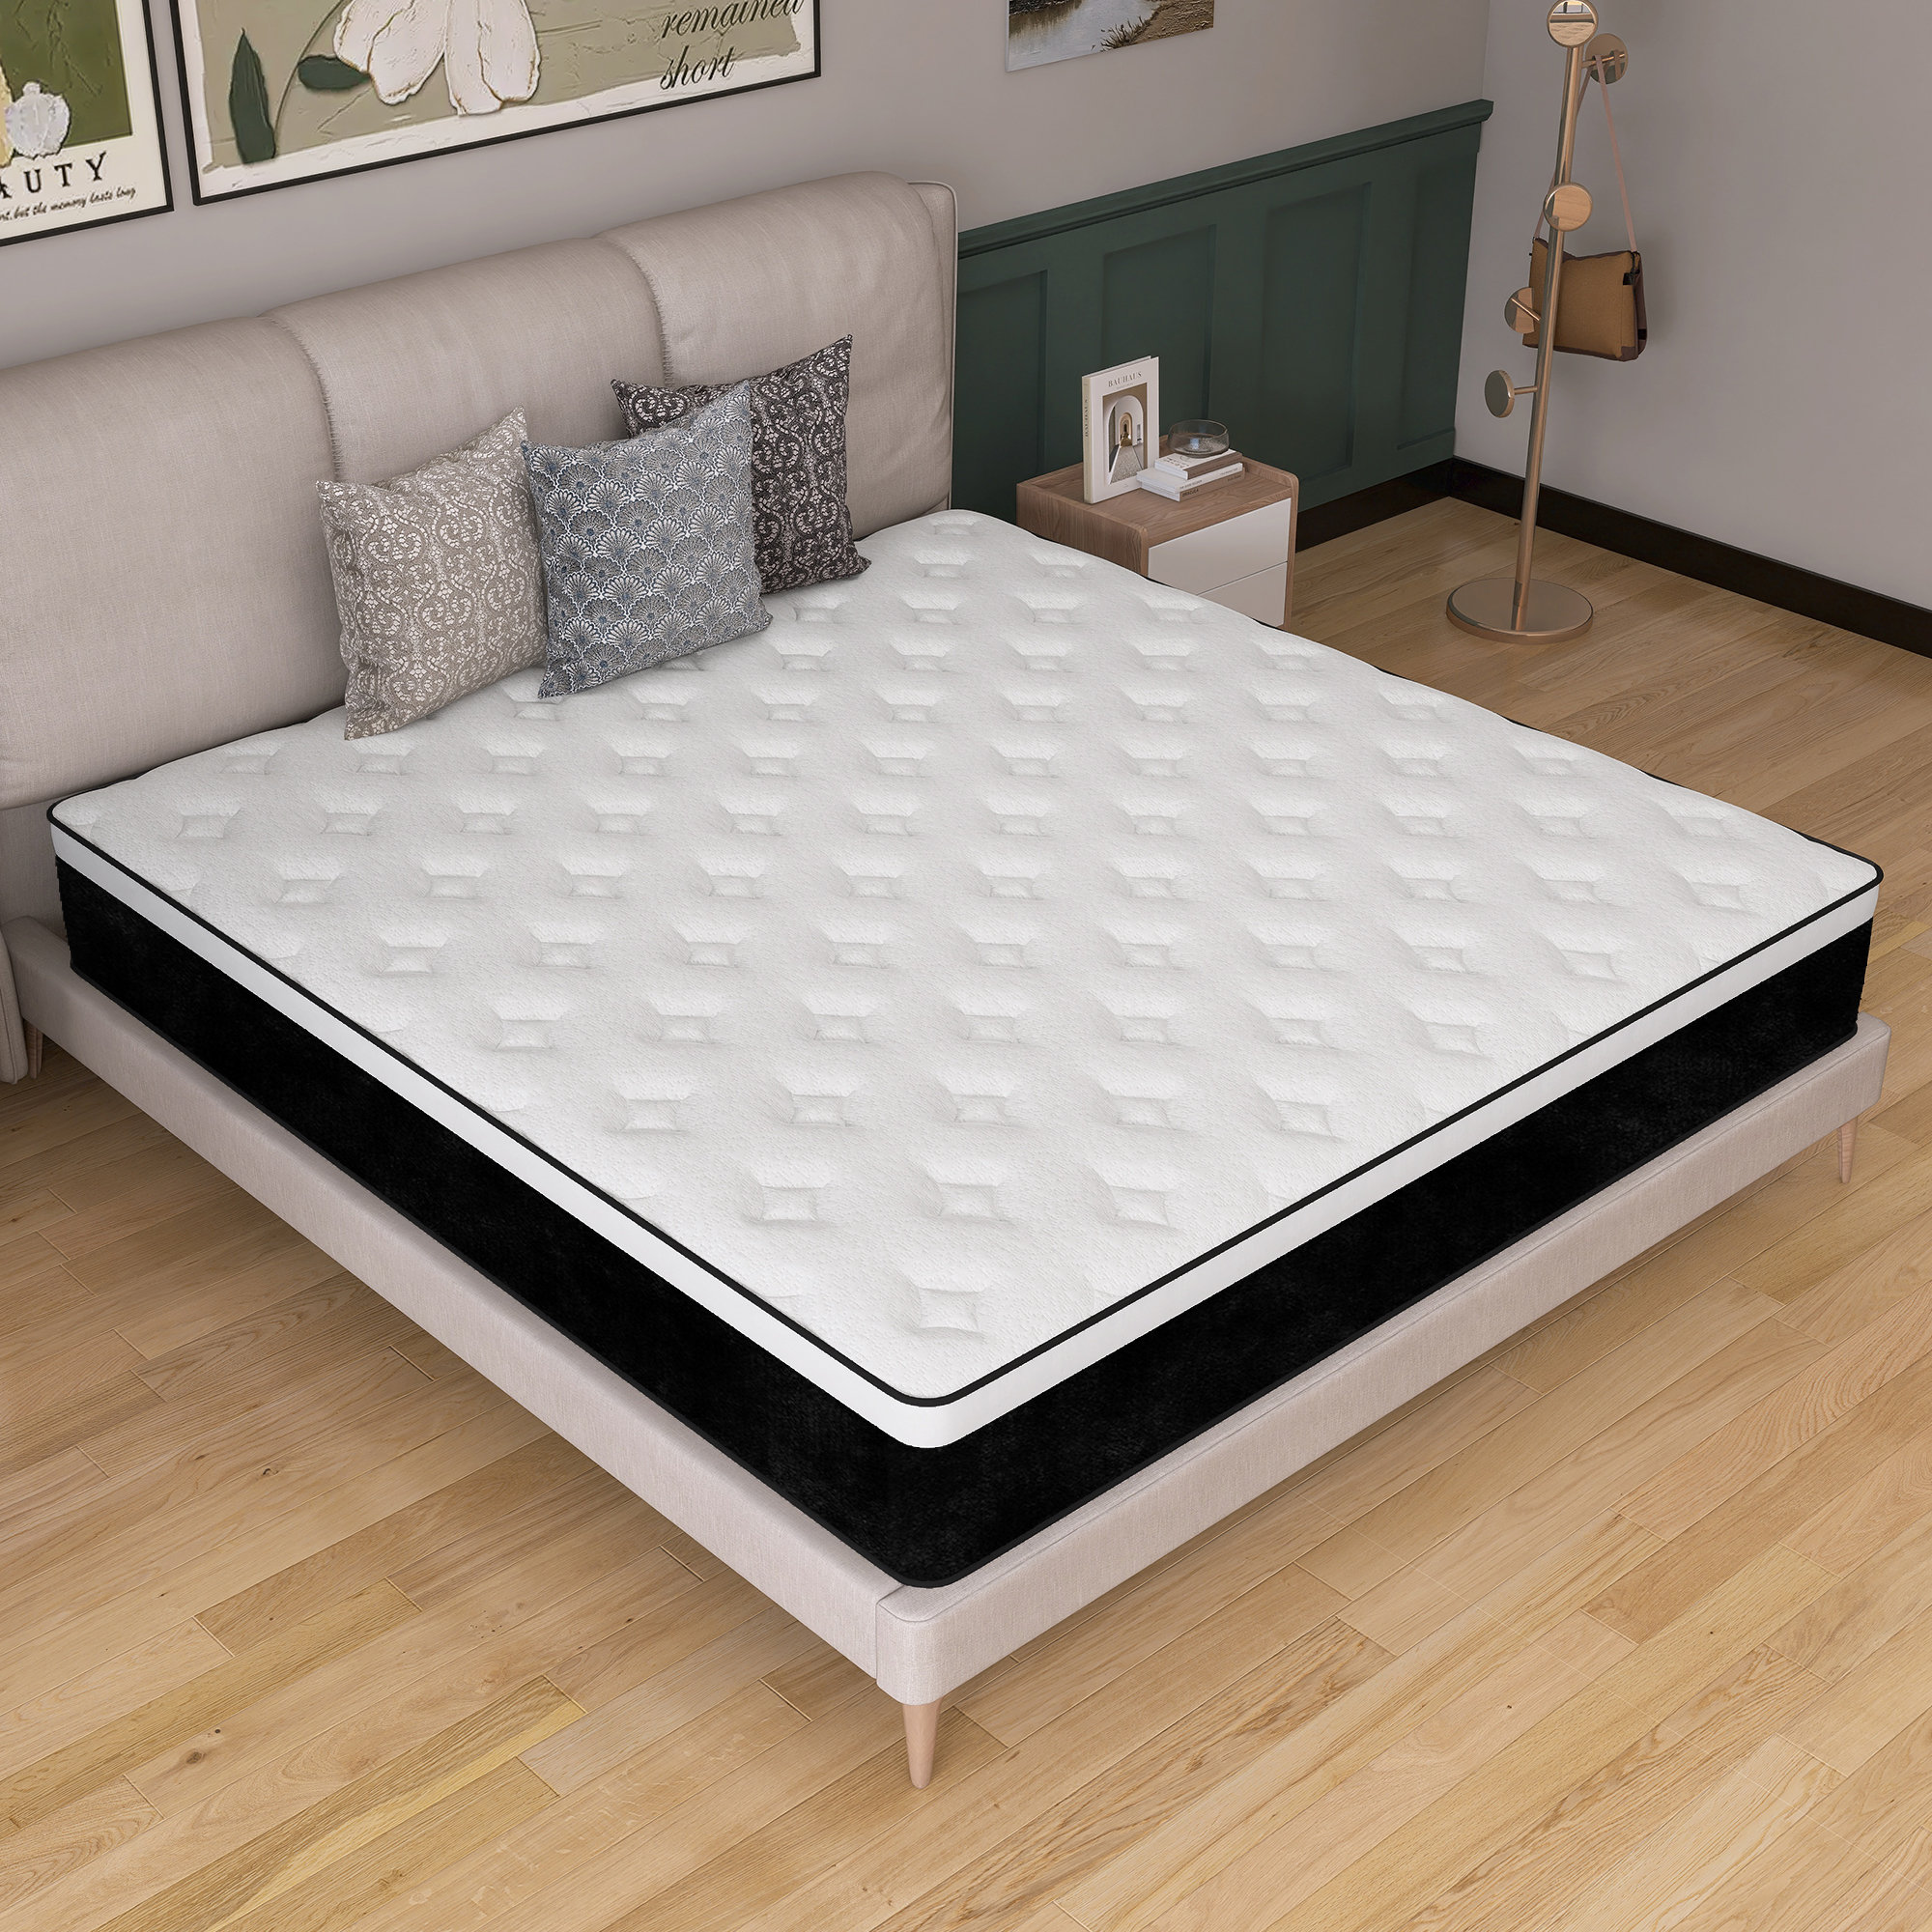 The Luxury of Good Sleep with a Holder Mattress - Indiana Design